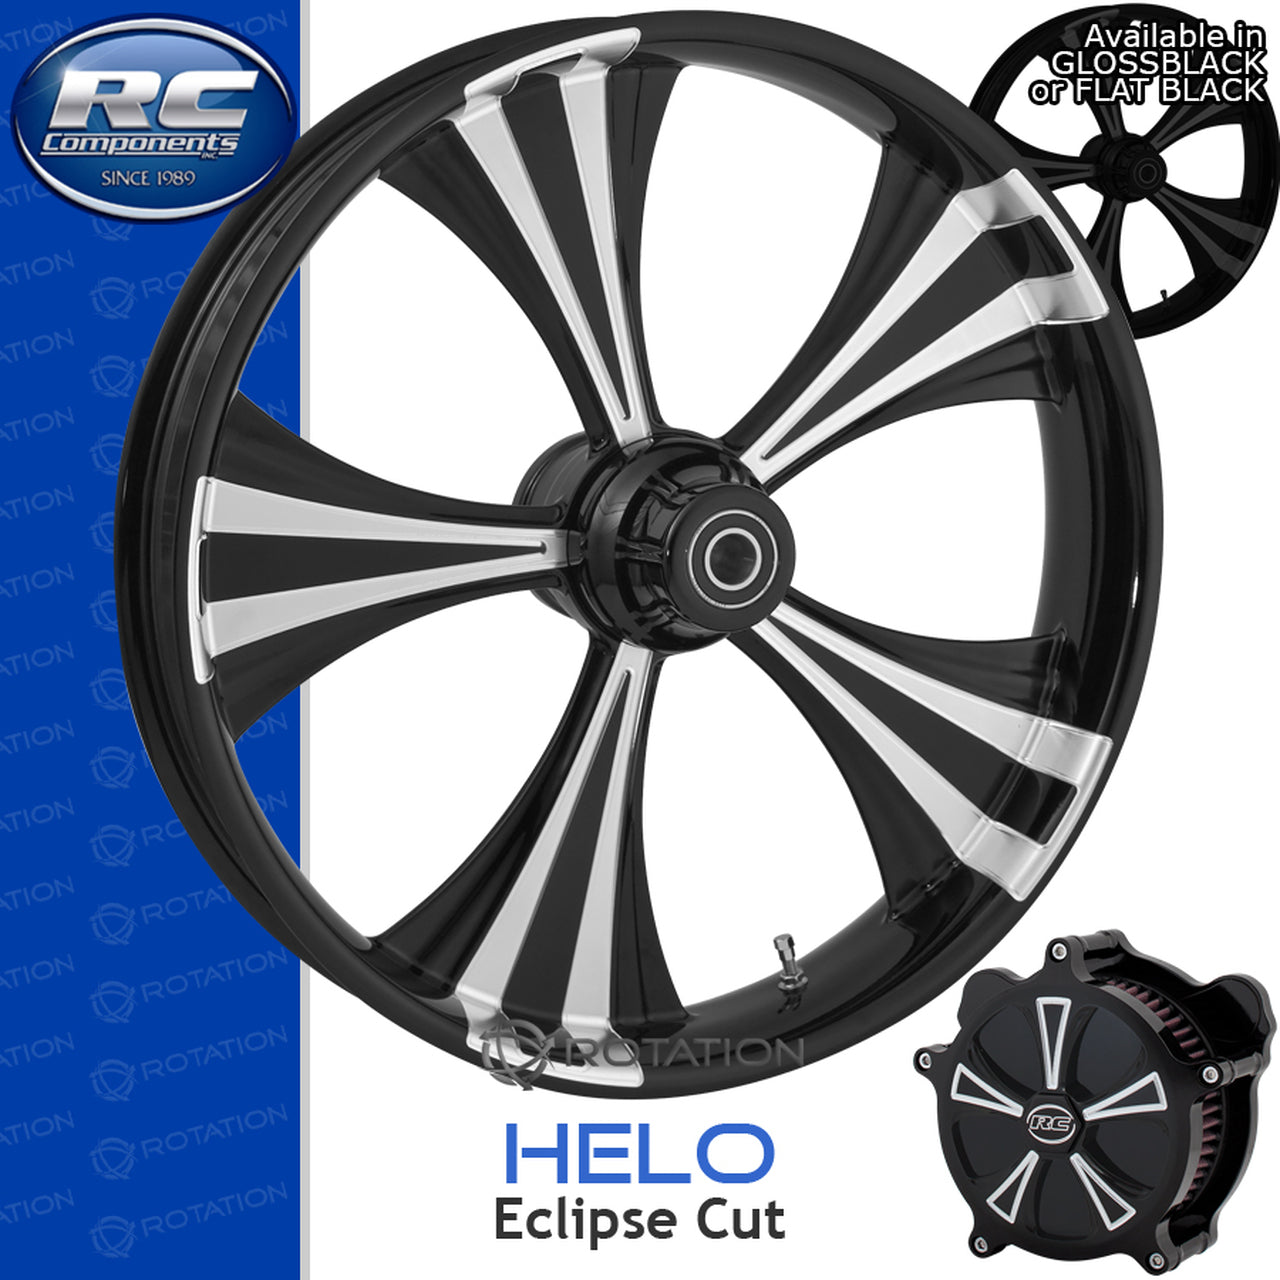 RC Components Helo Eclipse Touring Wheel